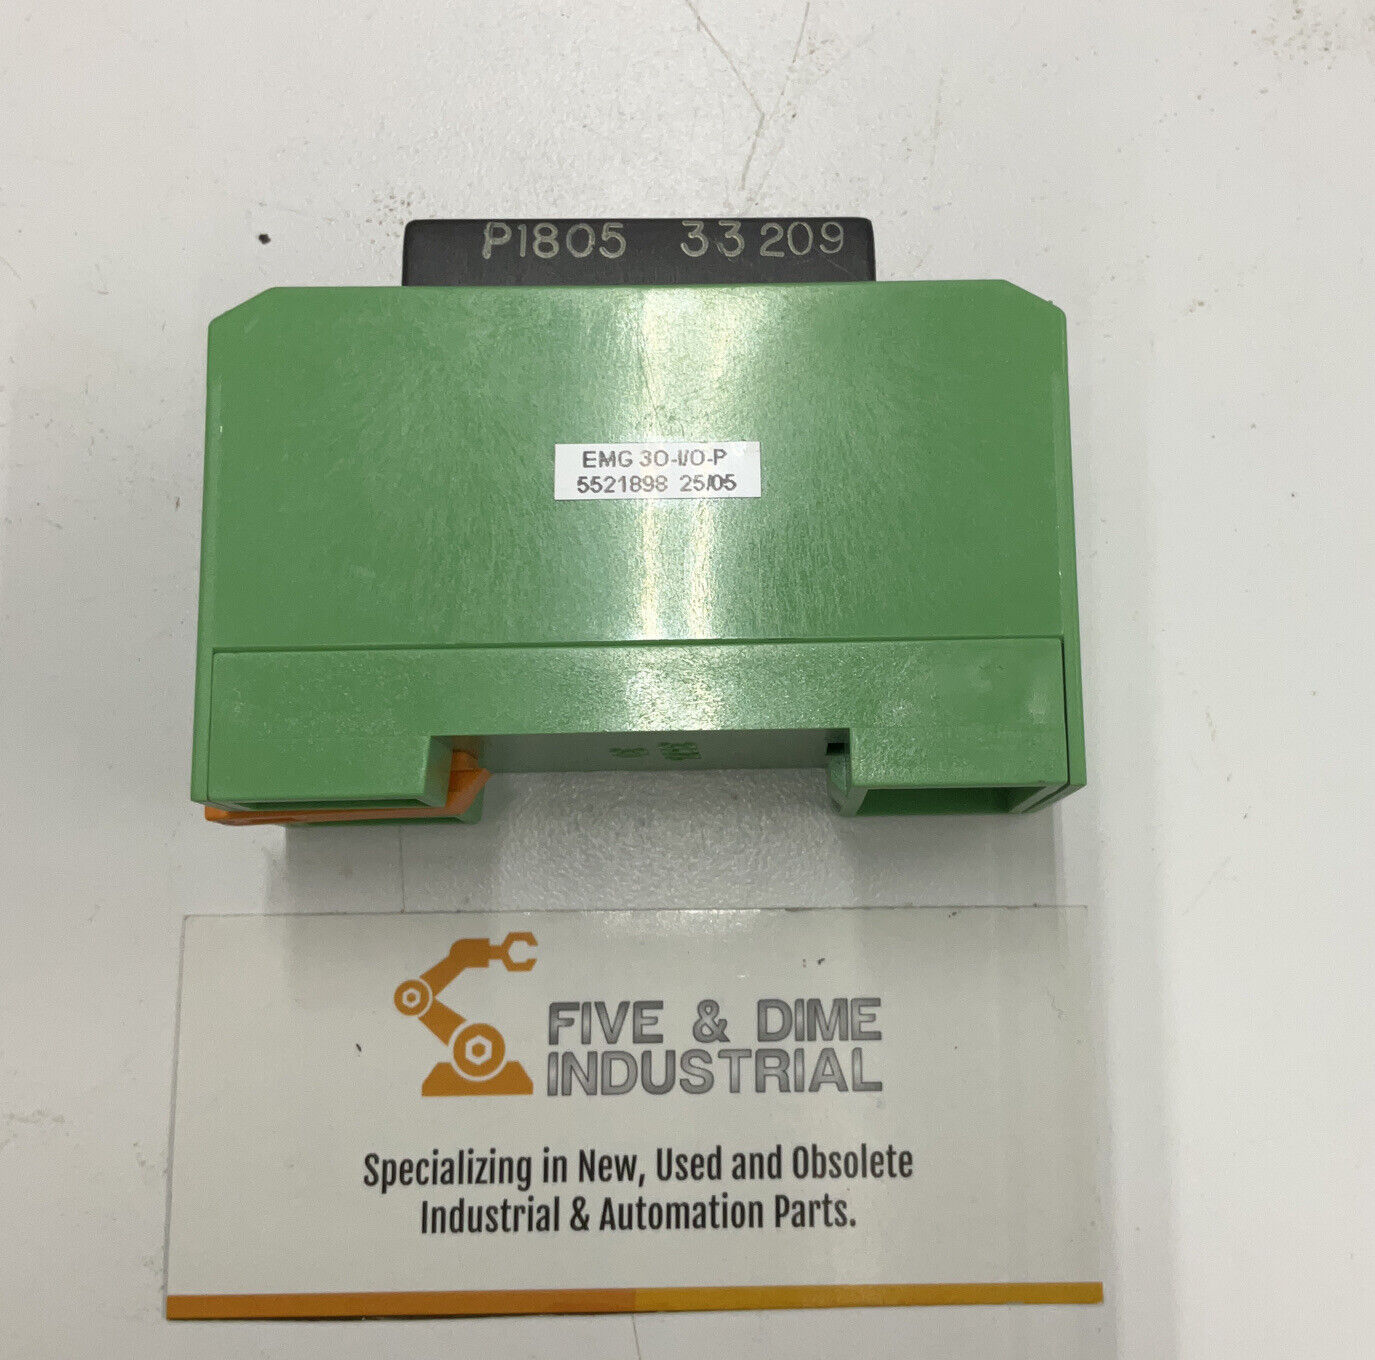 Phoenix Contact EMG 30-I/O-P Relay Base w/ Solid State Relay 2904010 (CL162)